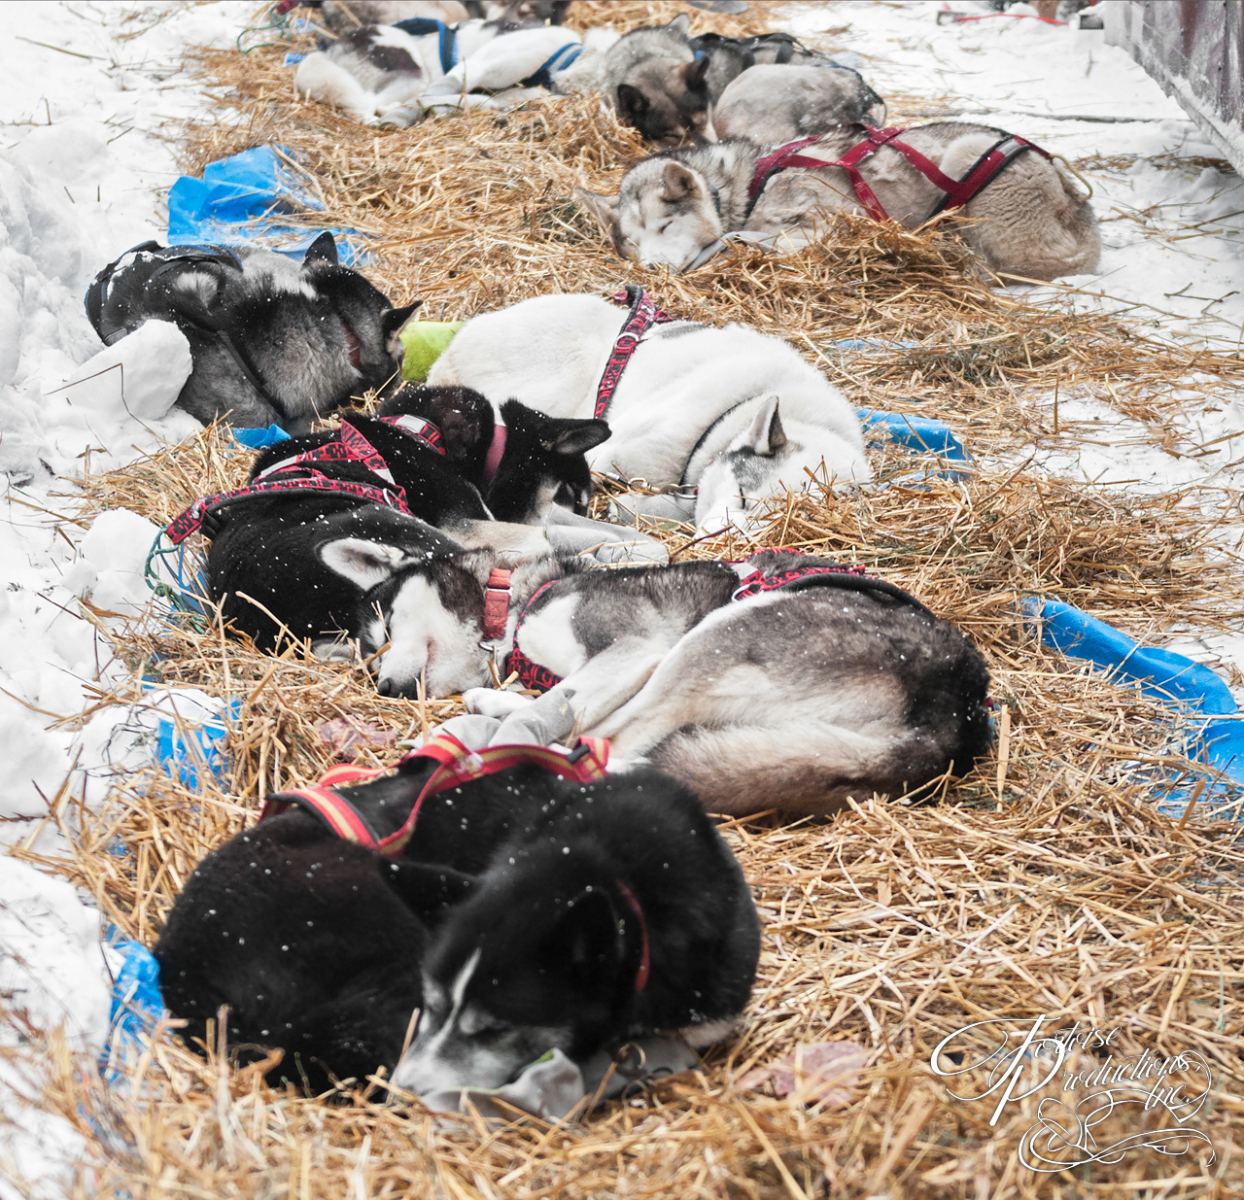 Sled Dogs Sleep at Checkpoint Between Legs